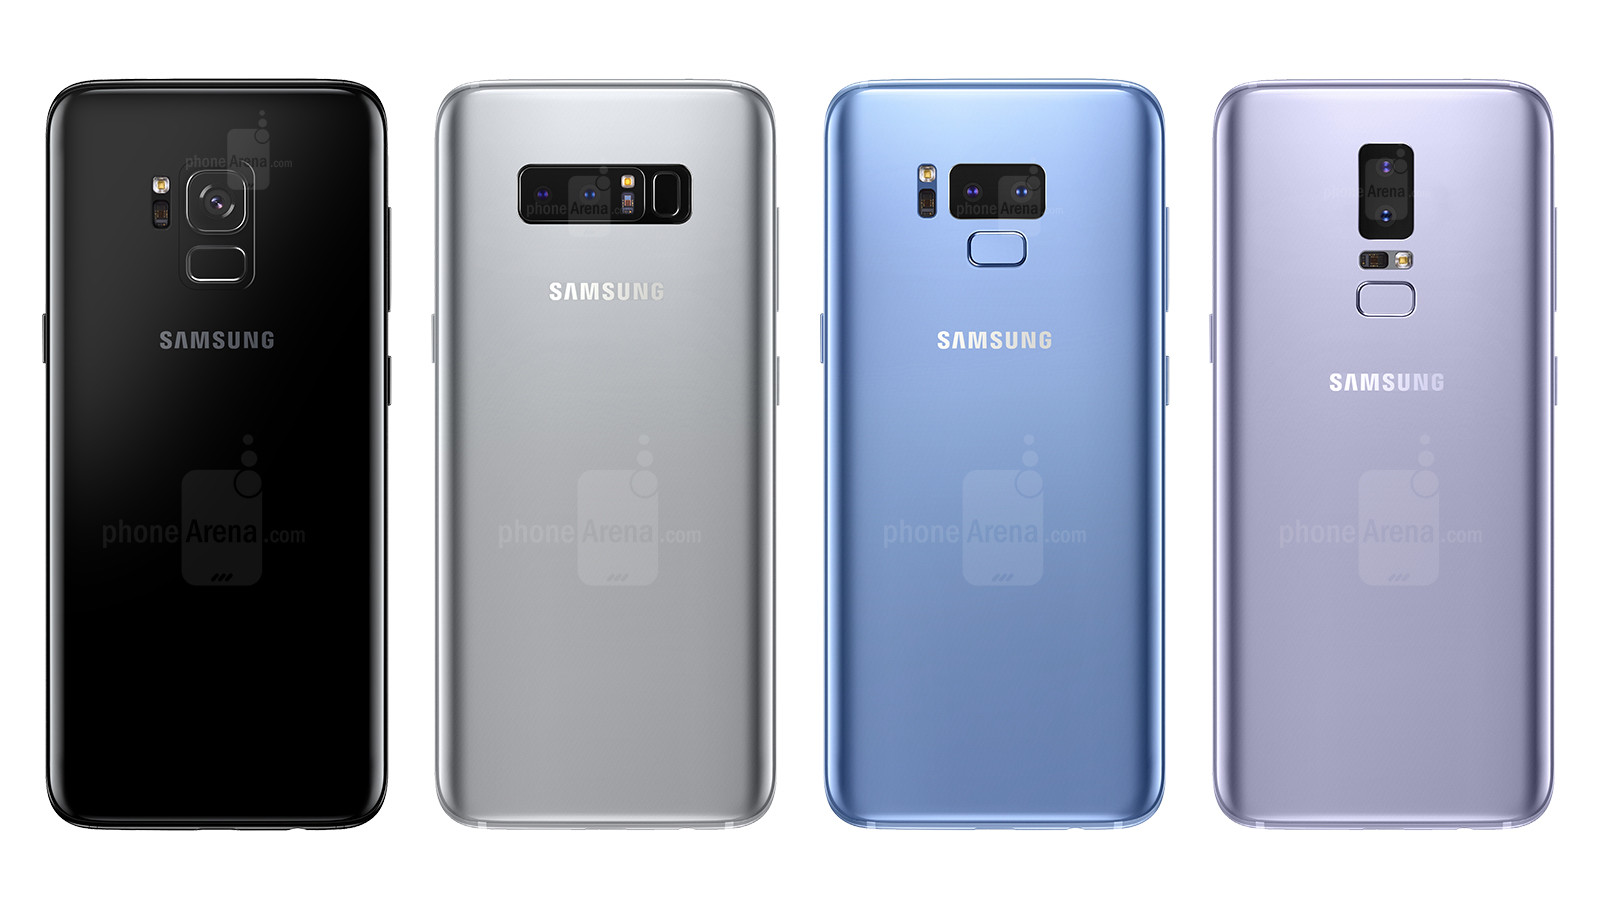 1511176421_galaxy-s9-concept-in-different-colors-and-camerafingerprint-scanner-placement-variations.jpg